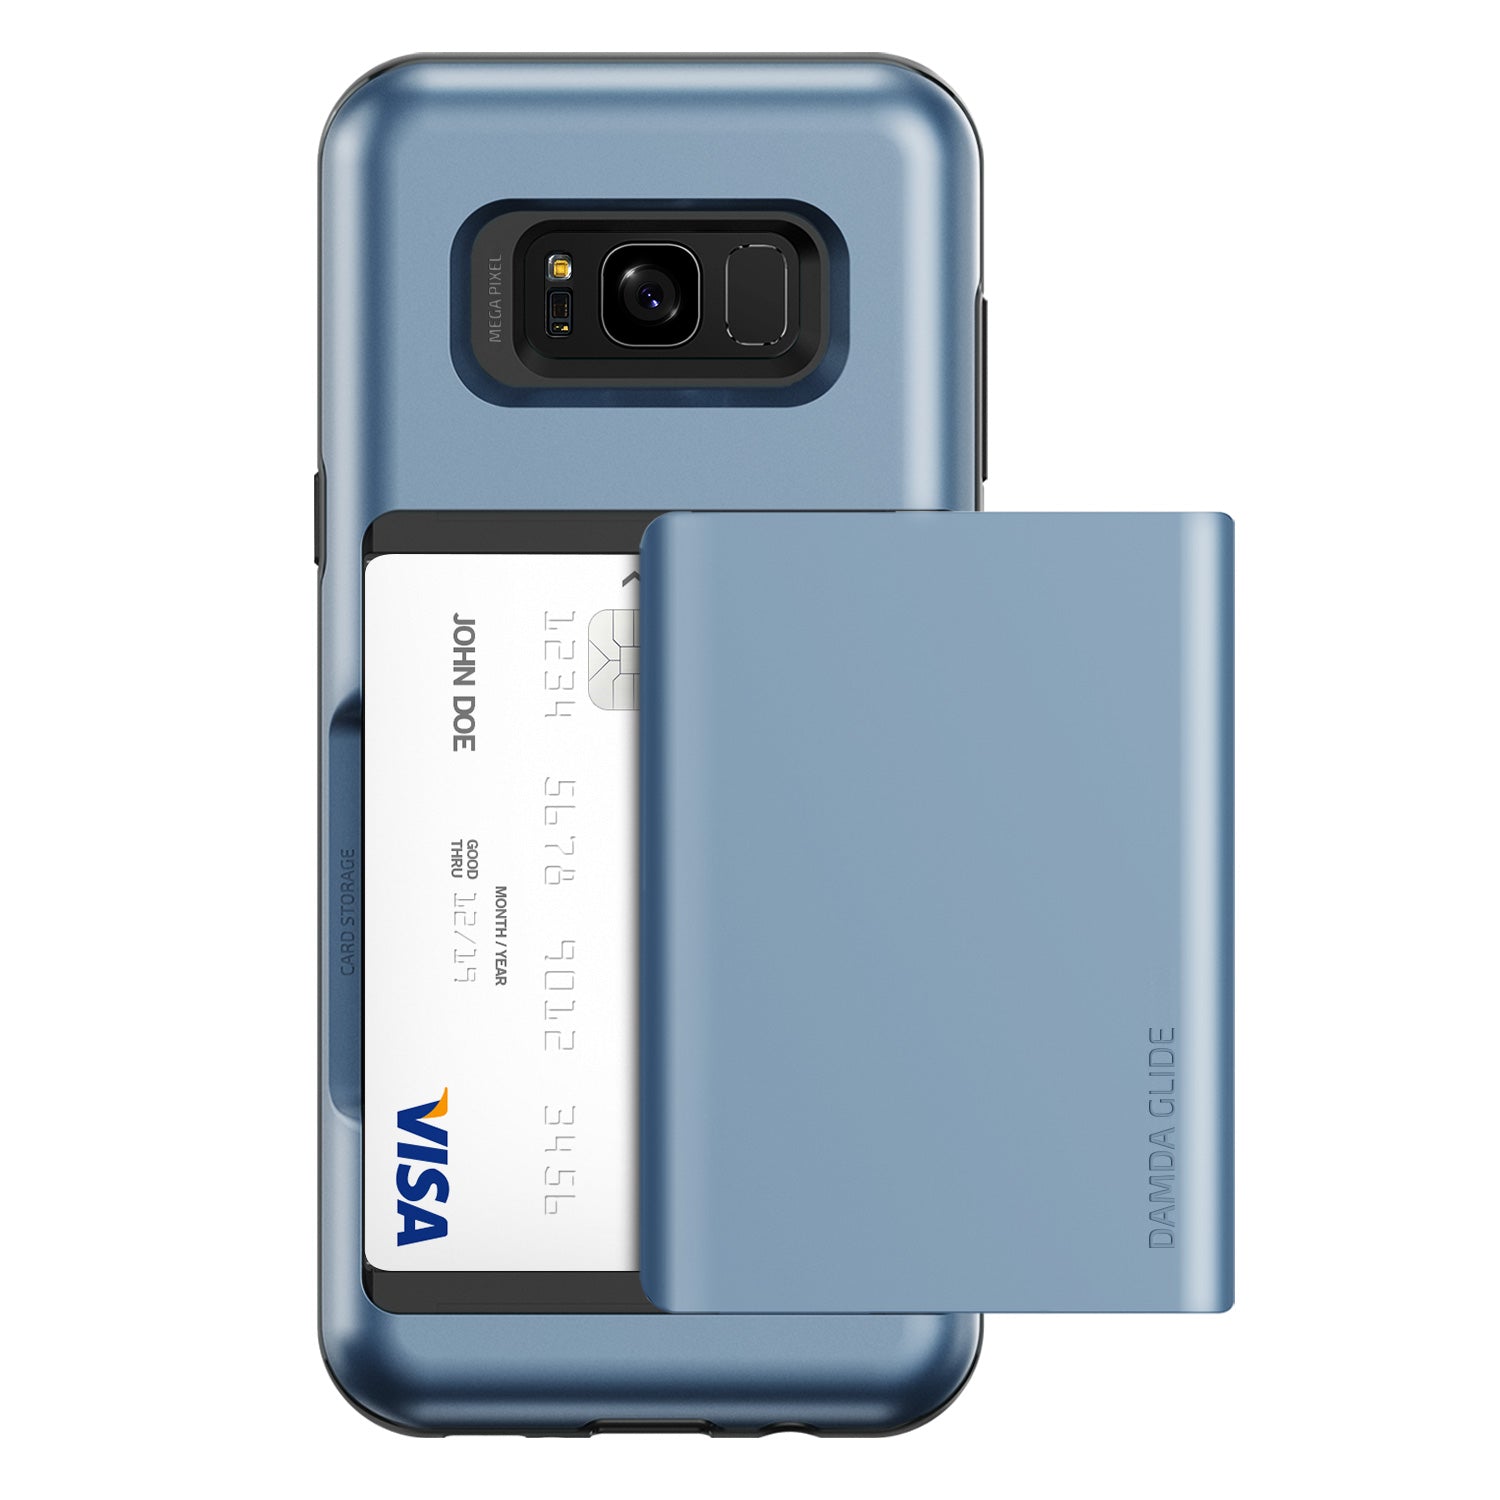 Samsung Galaxy S8 wallet rugged case with multiple durable and convenient card slot with sleek minimalism by VRS